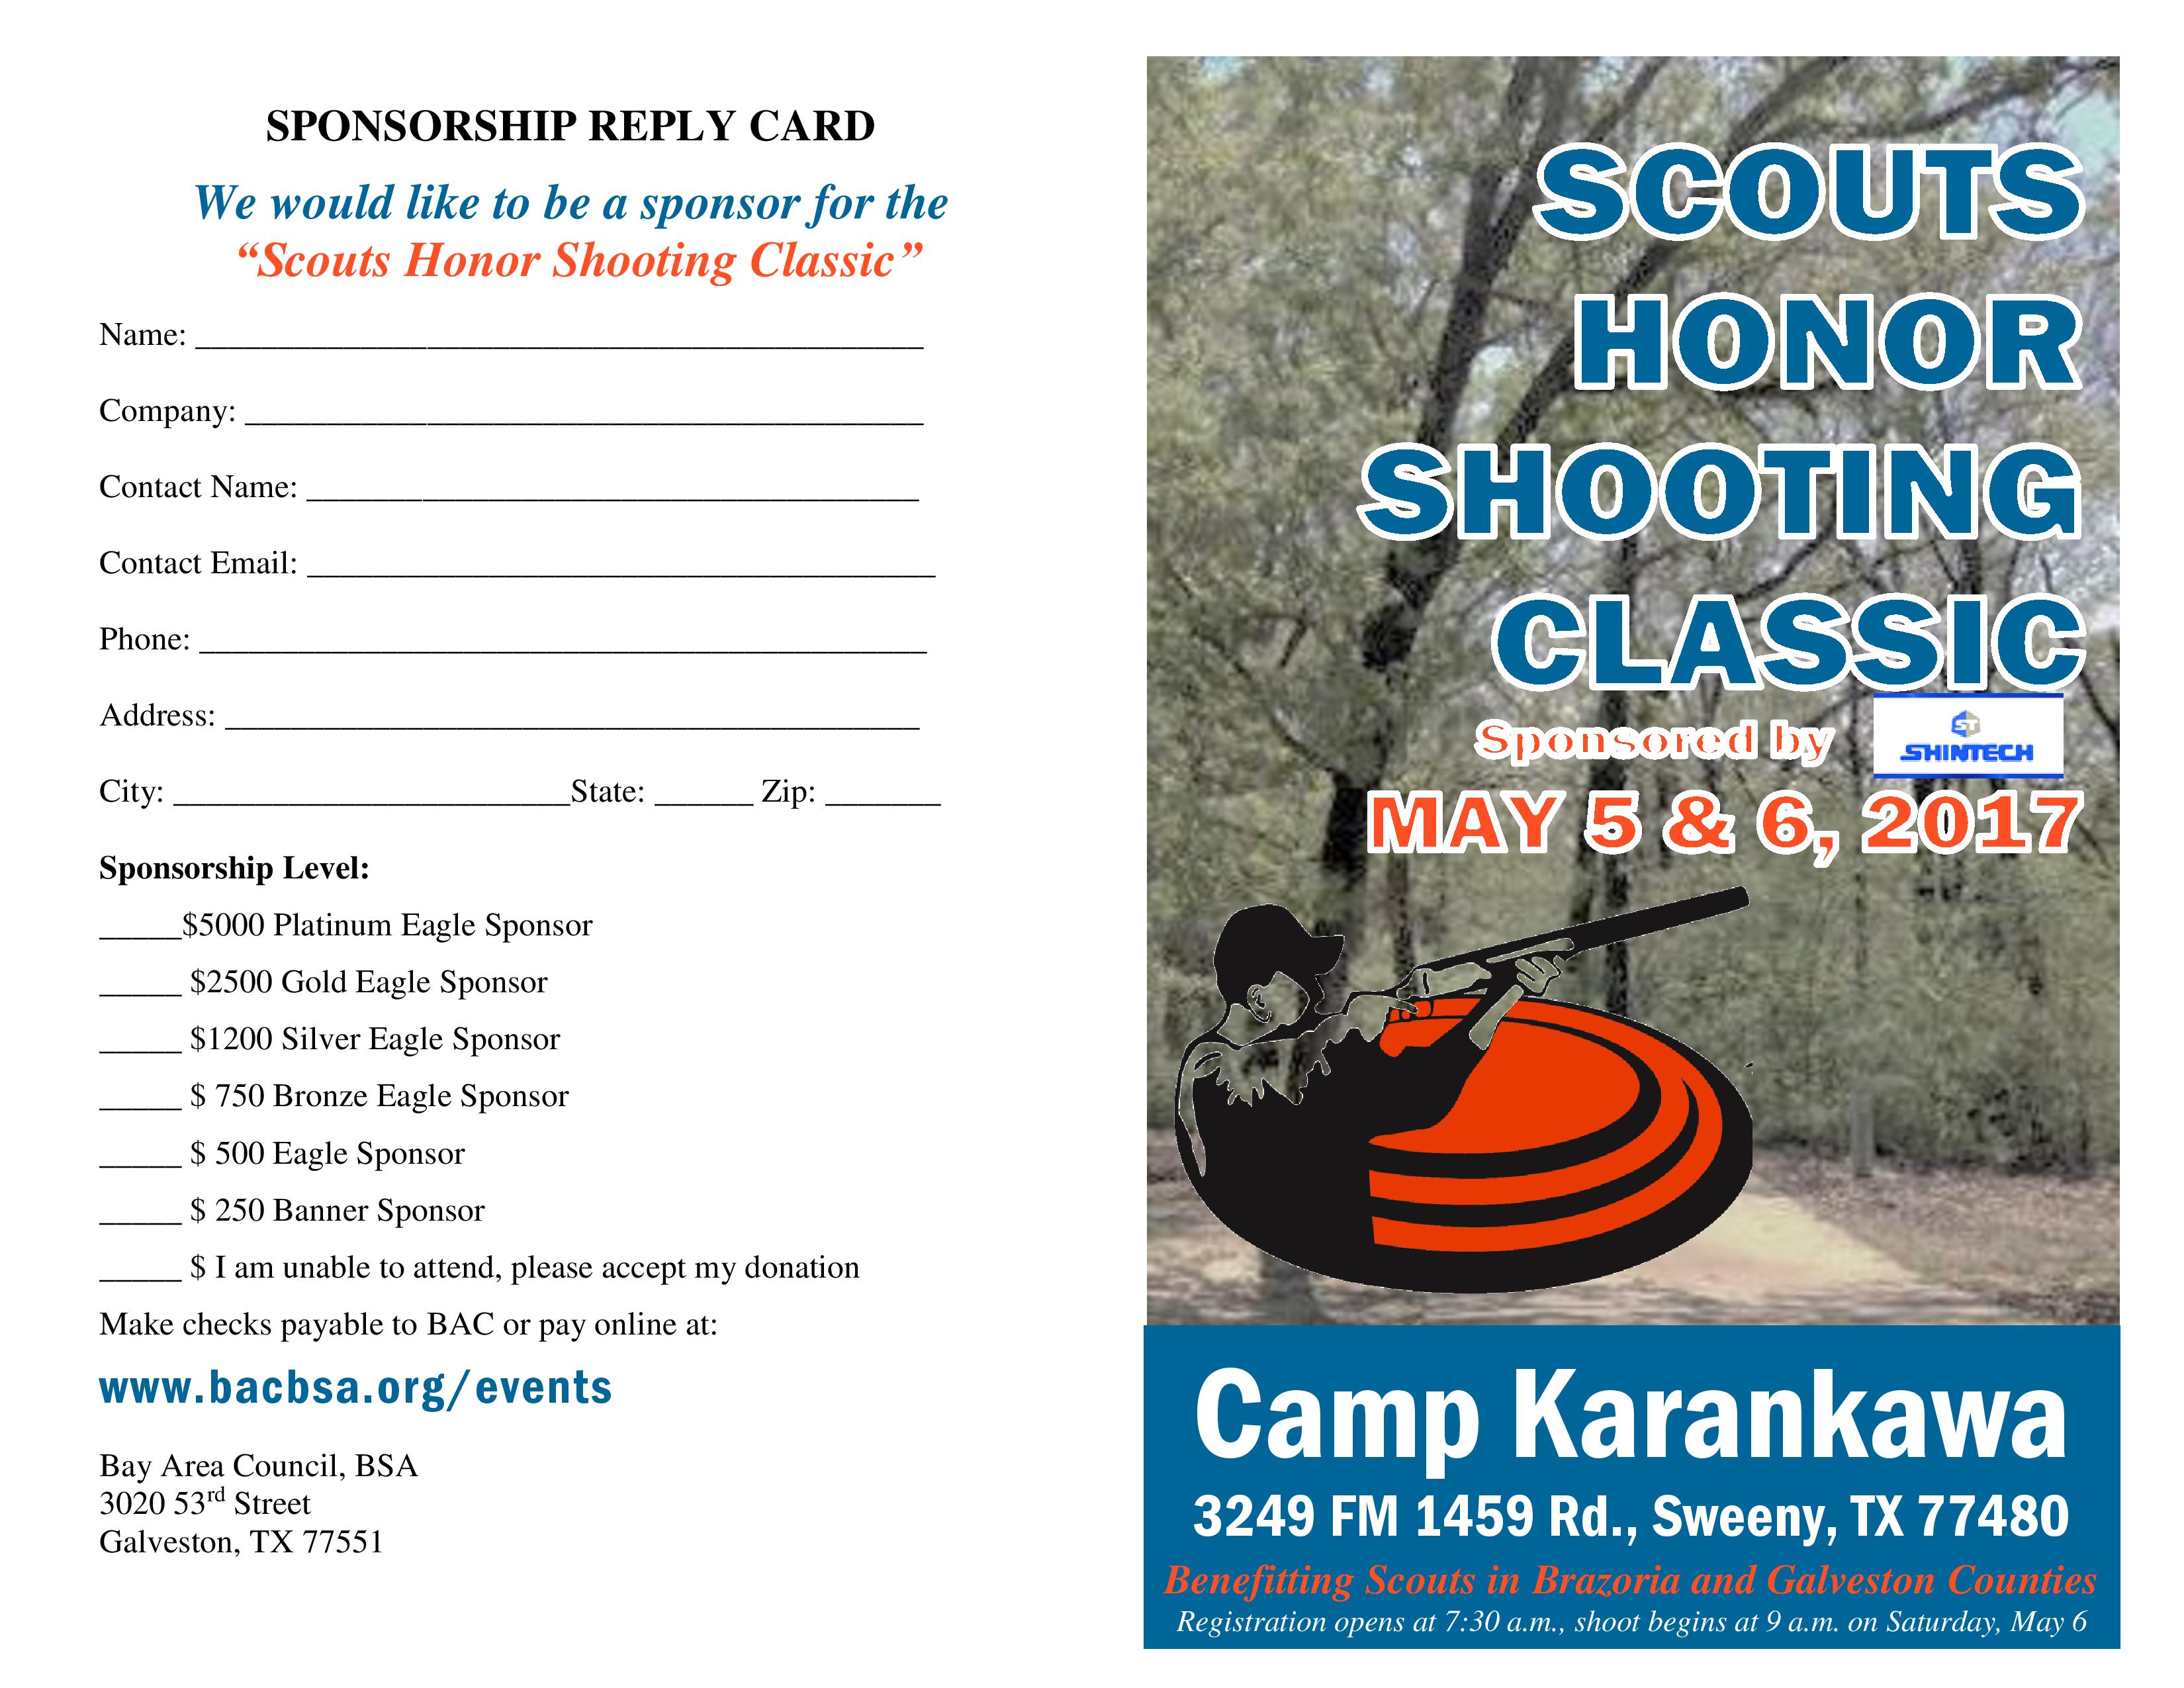 Scouts Honor Shooting Classic